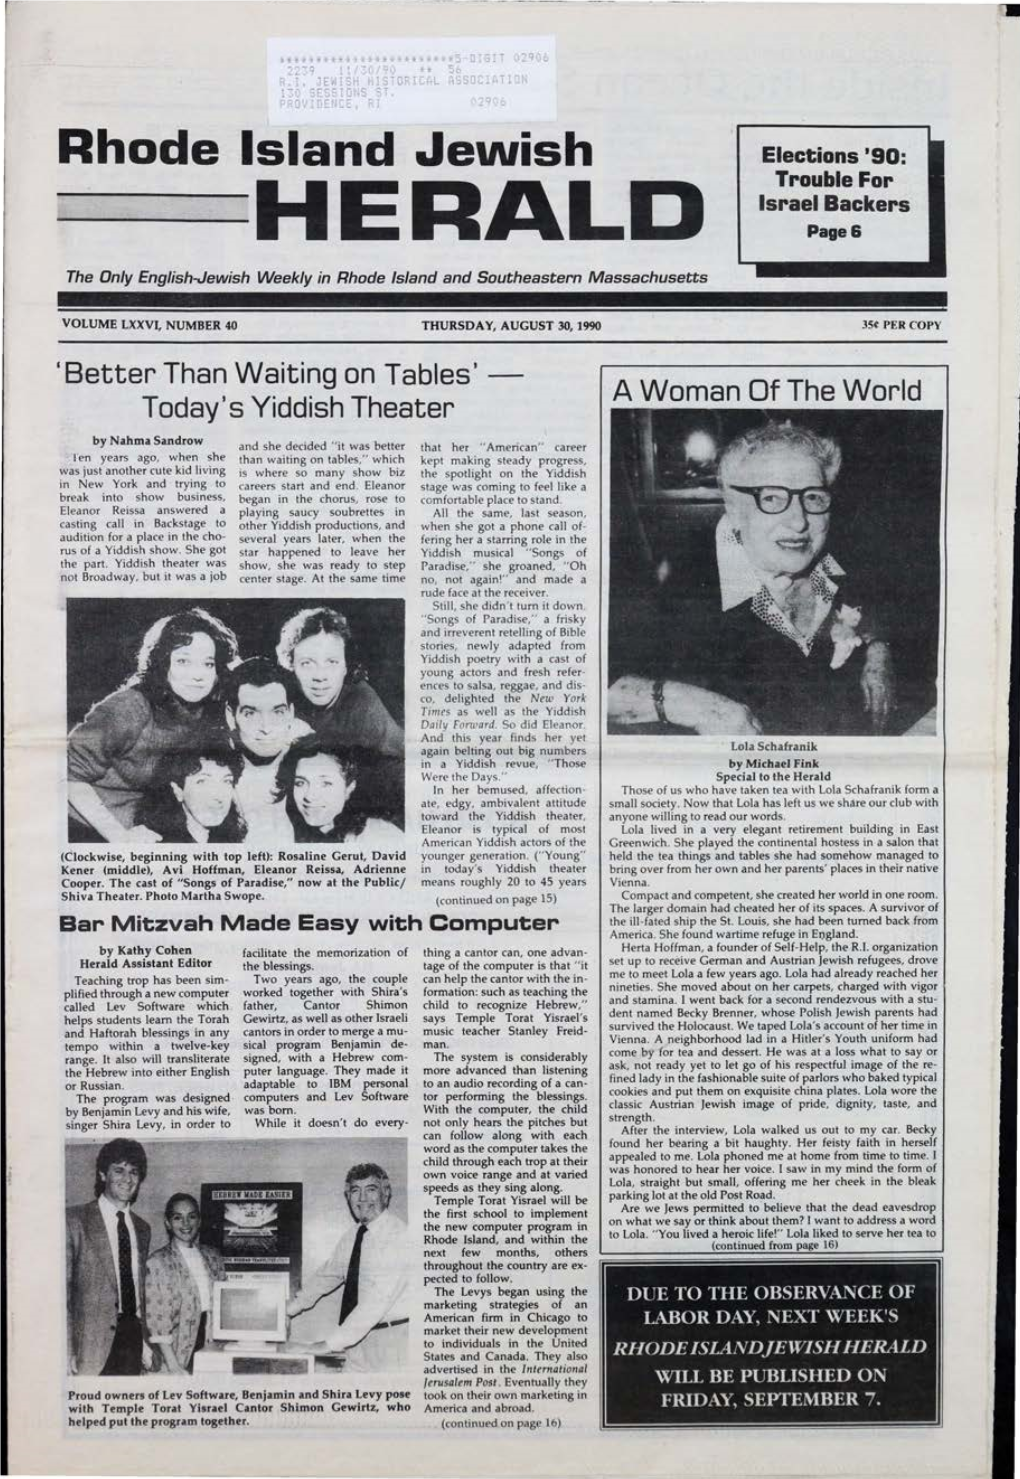 AUGUST 30, 1990 35T PER COPY 'Better Than Waiting on Tables' a Woman of the World Today's Yiddish Theater